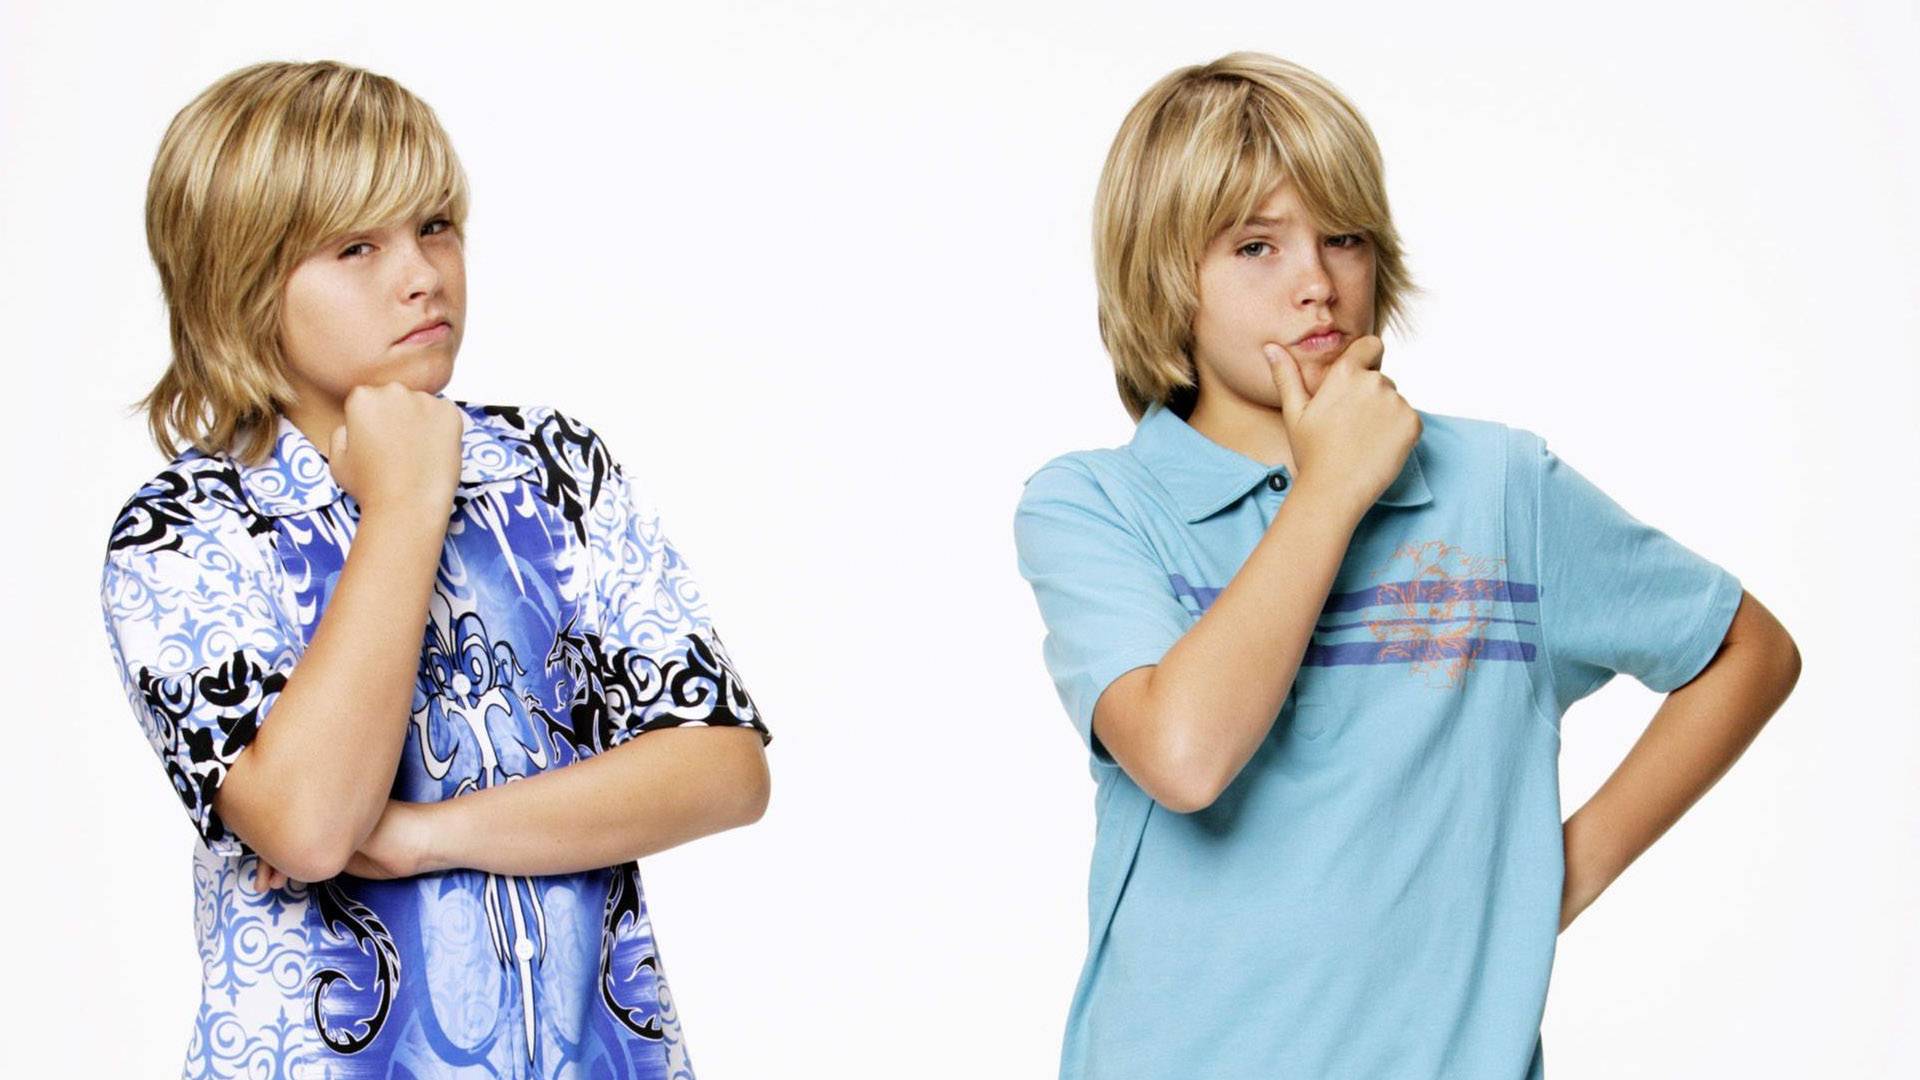 Suitelife of zack and cody porn images